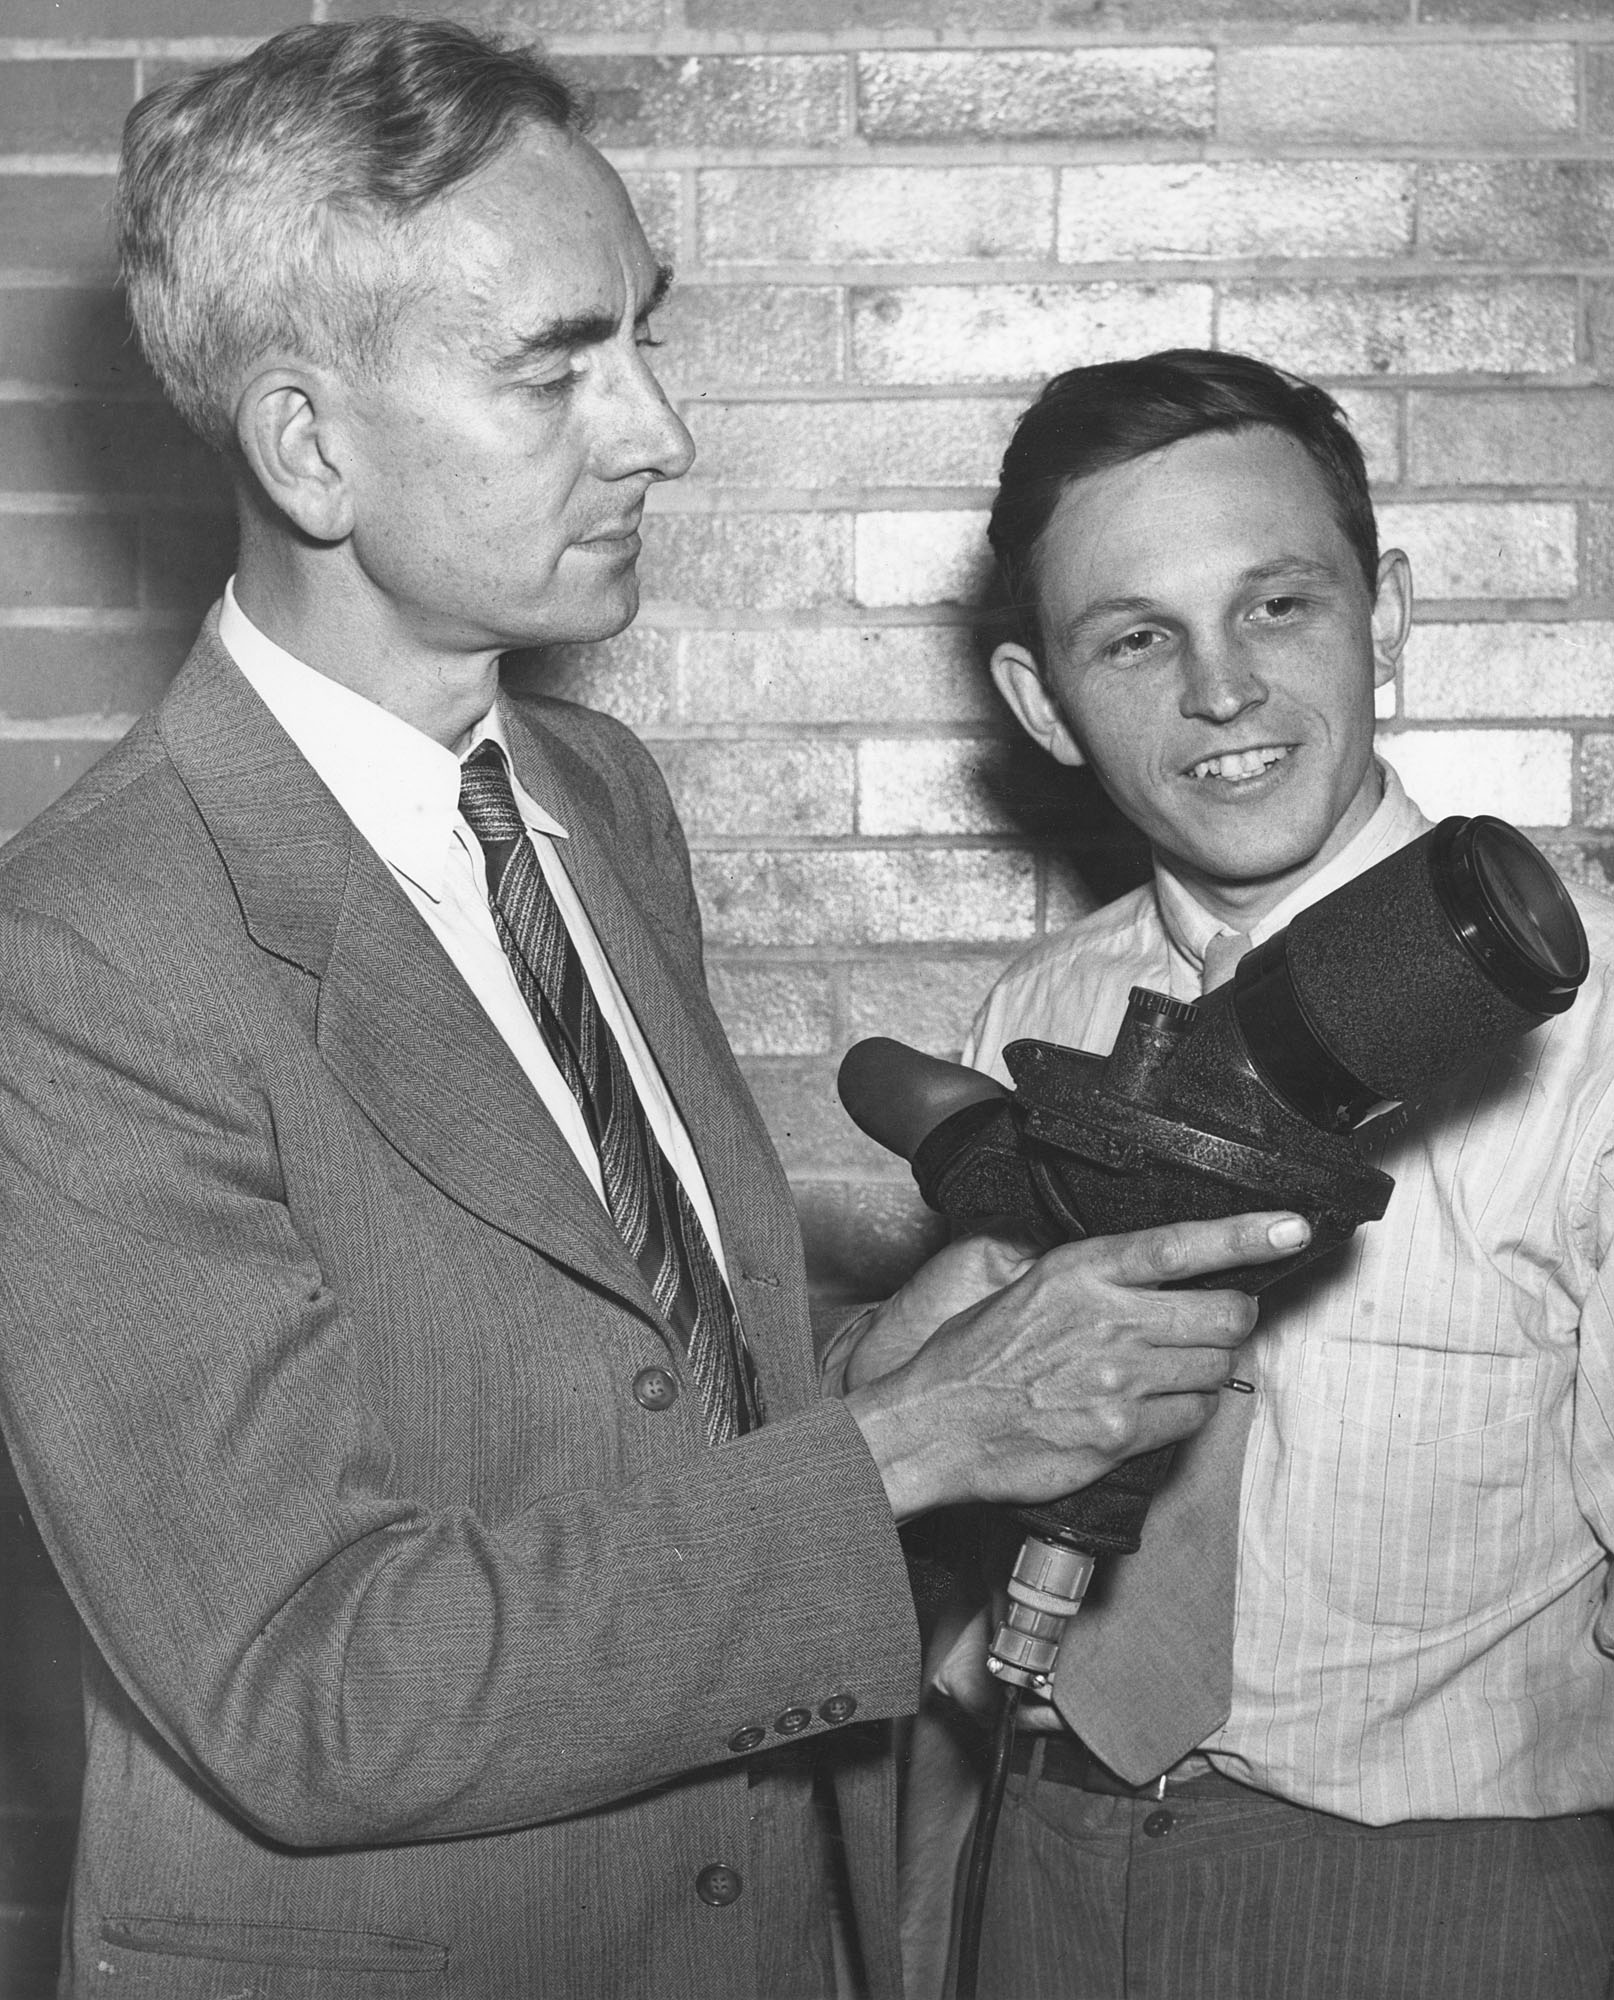 man holding an optical instrument as another man looks on